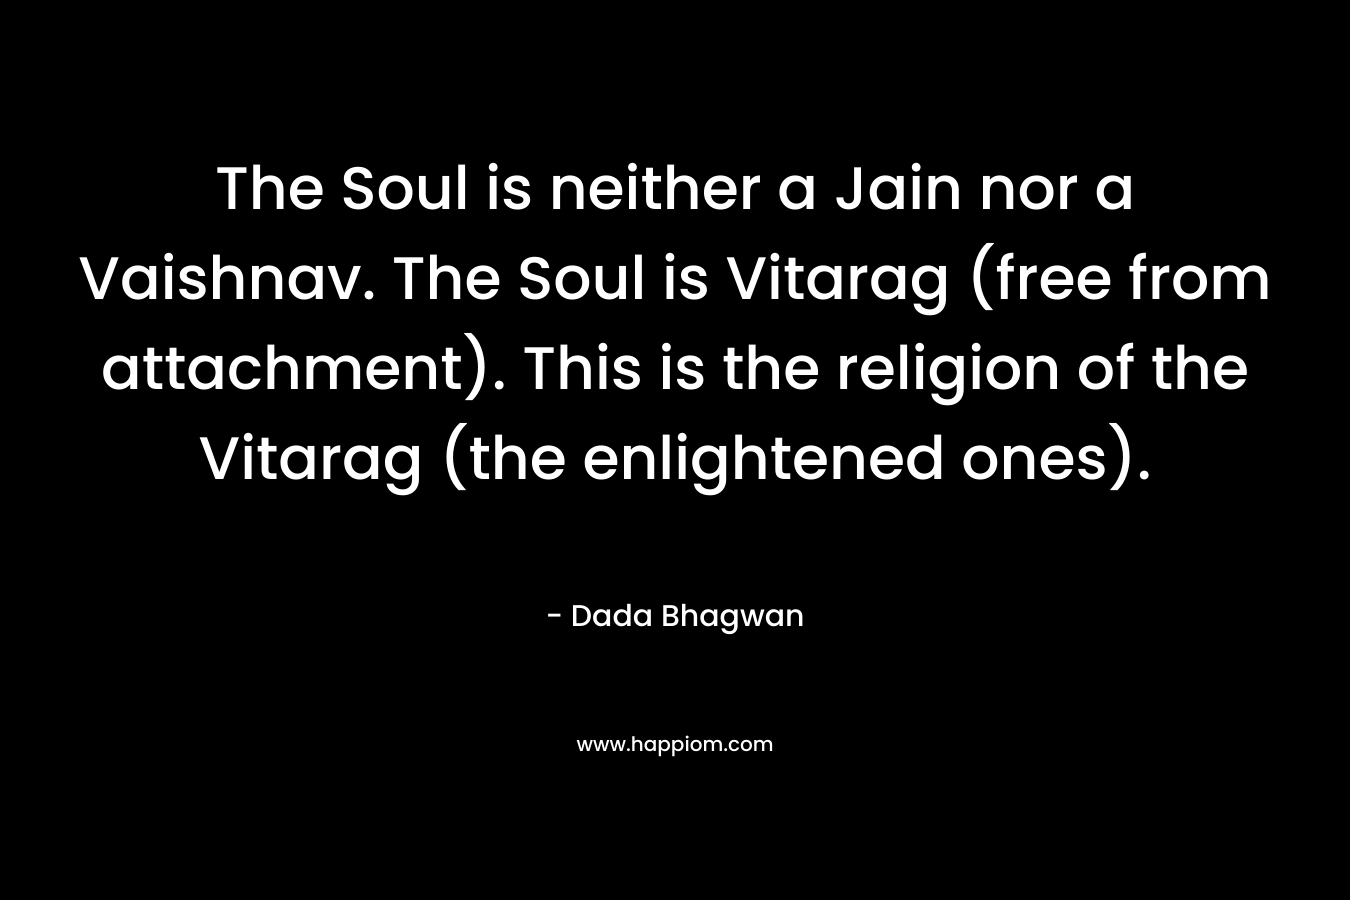 The Soul is neither a Jain nor a Vaishnav. The Soul is Vitarag (free from attachment). This is the religion of the Vitarag (the enlightened ones).